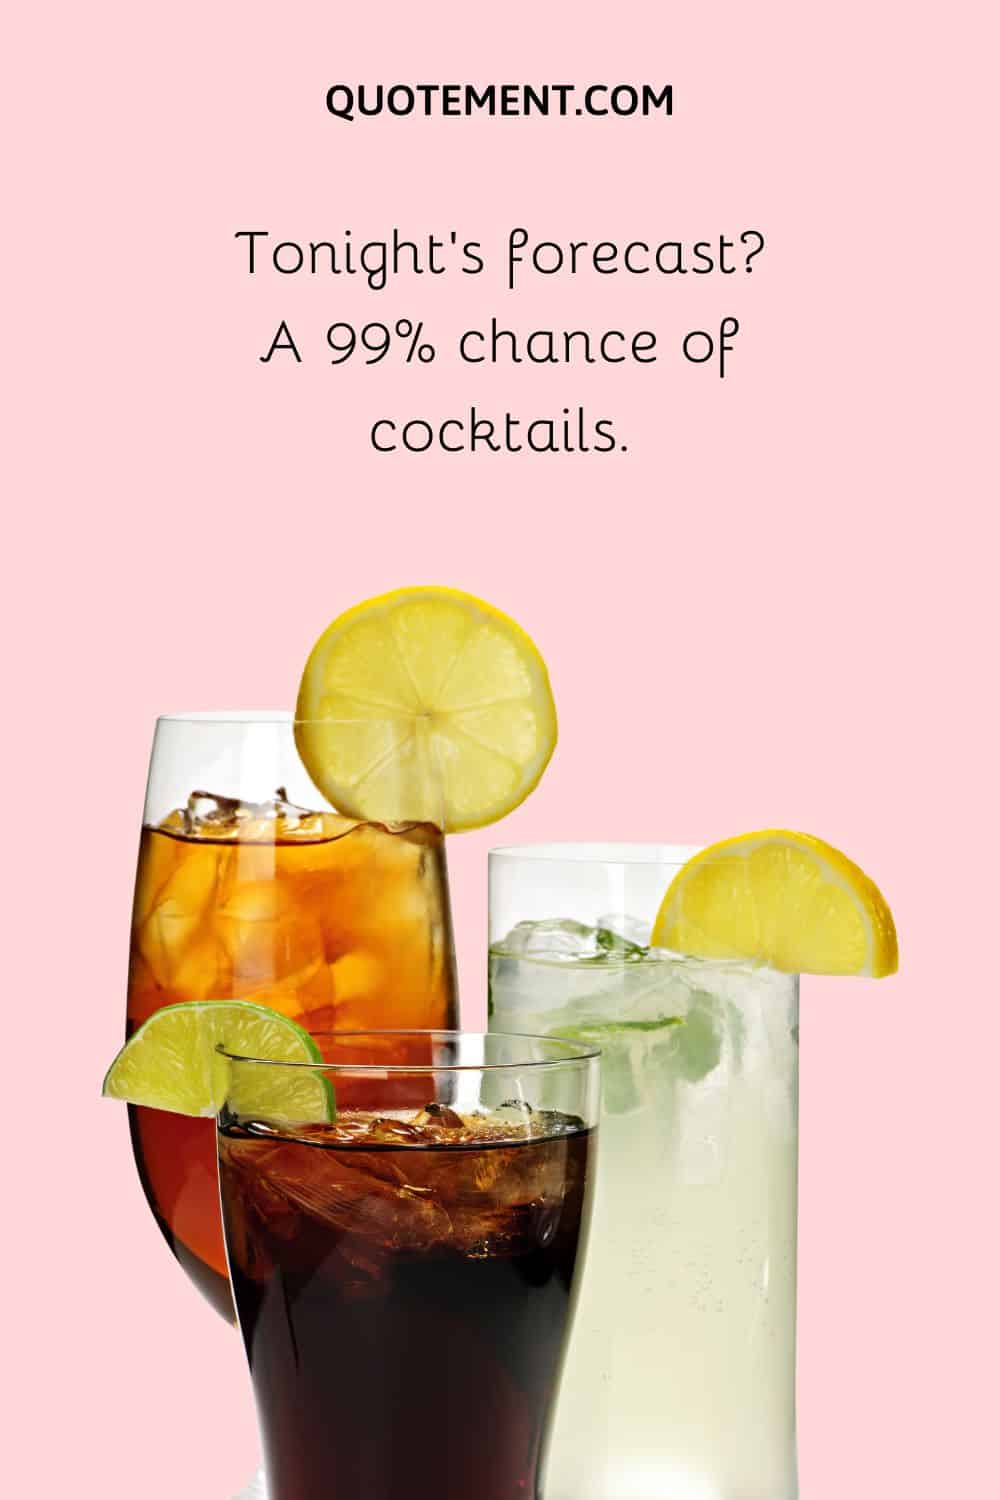 A 99% chance of cocktails